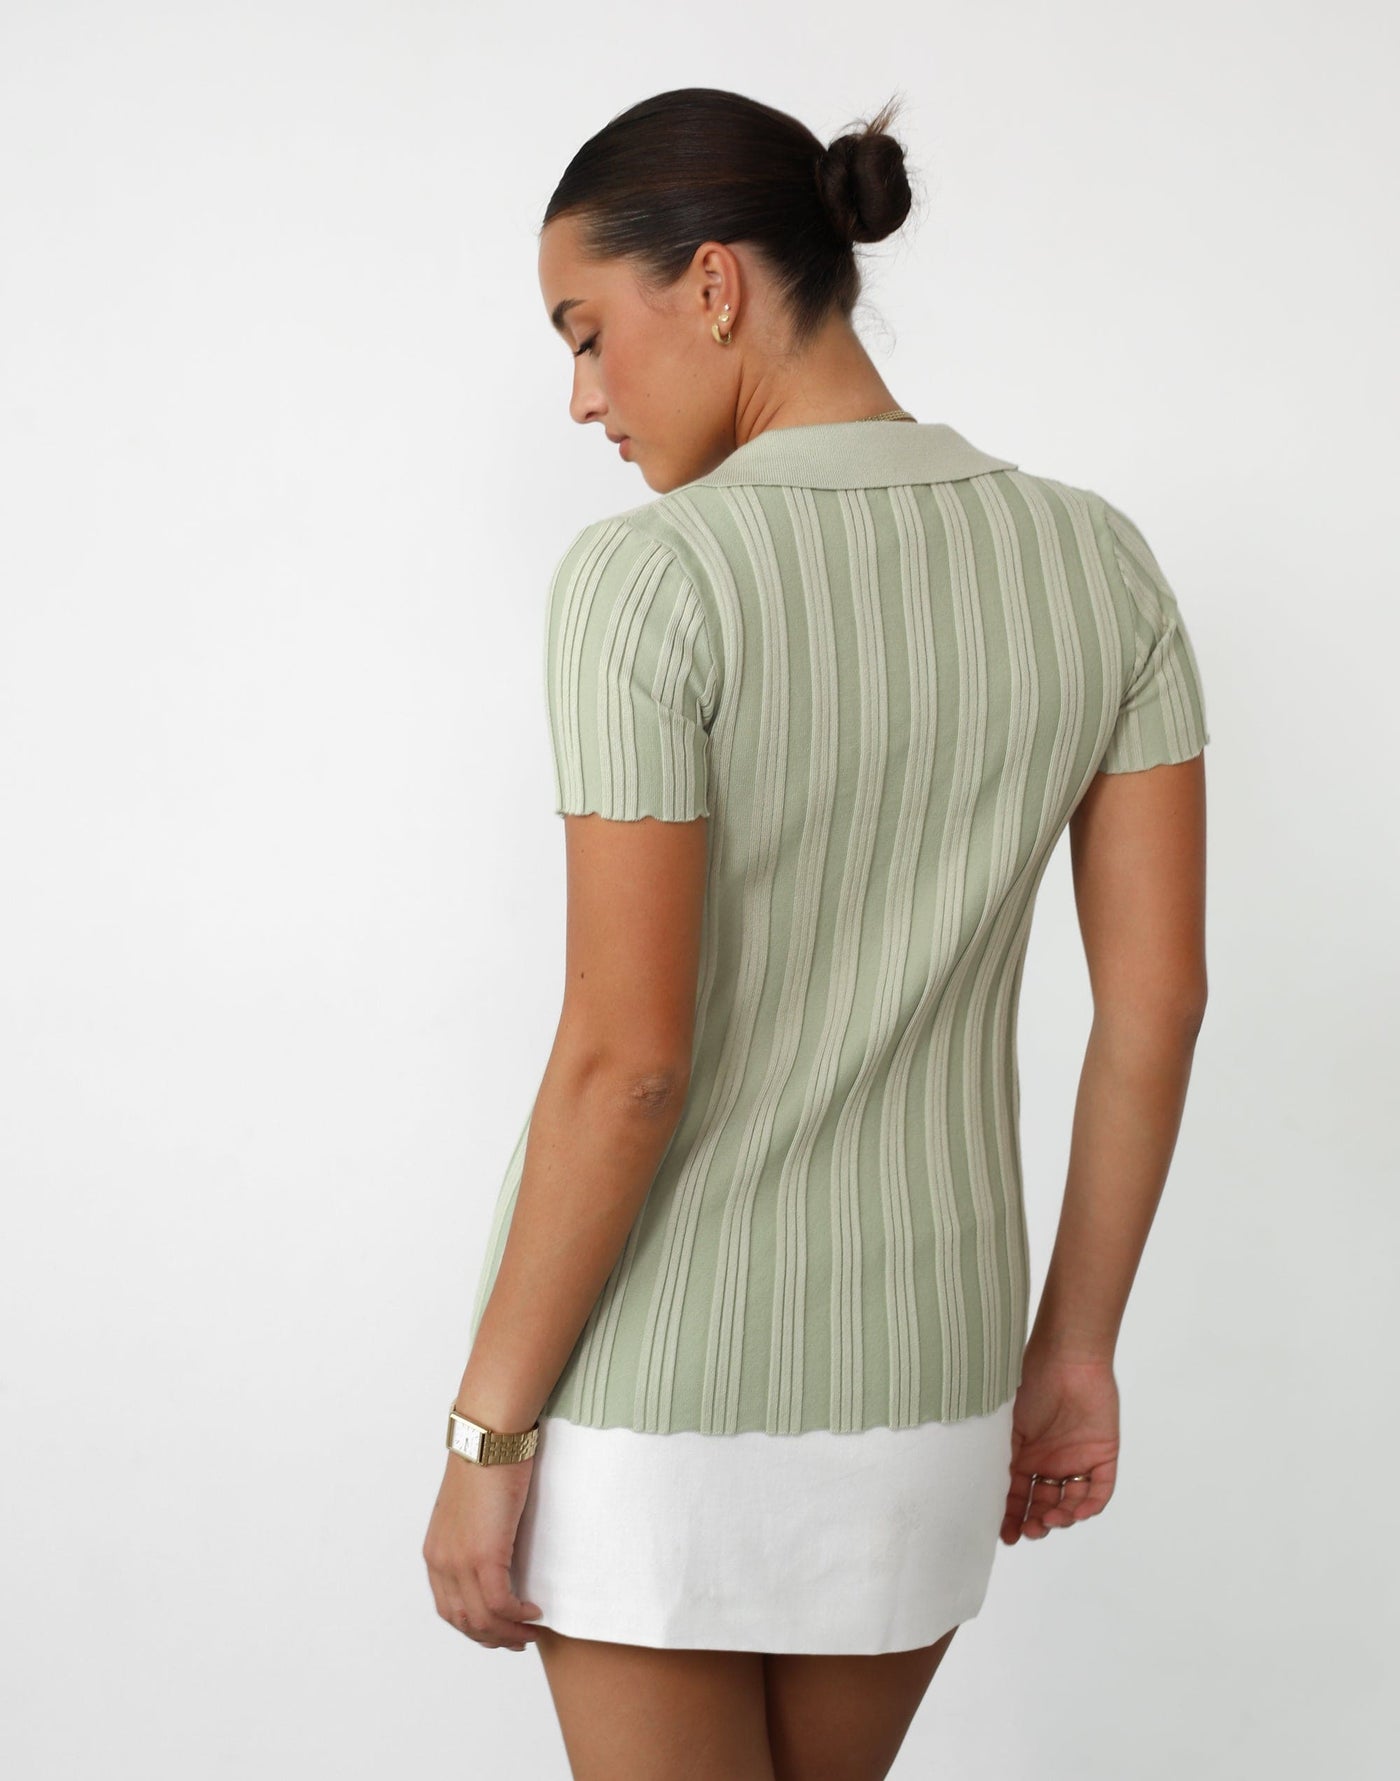 Fran Top (Avocado) - Button Closure Ribbed Top - Women's Top - Charcoal Clothing